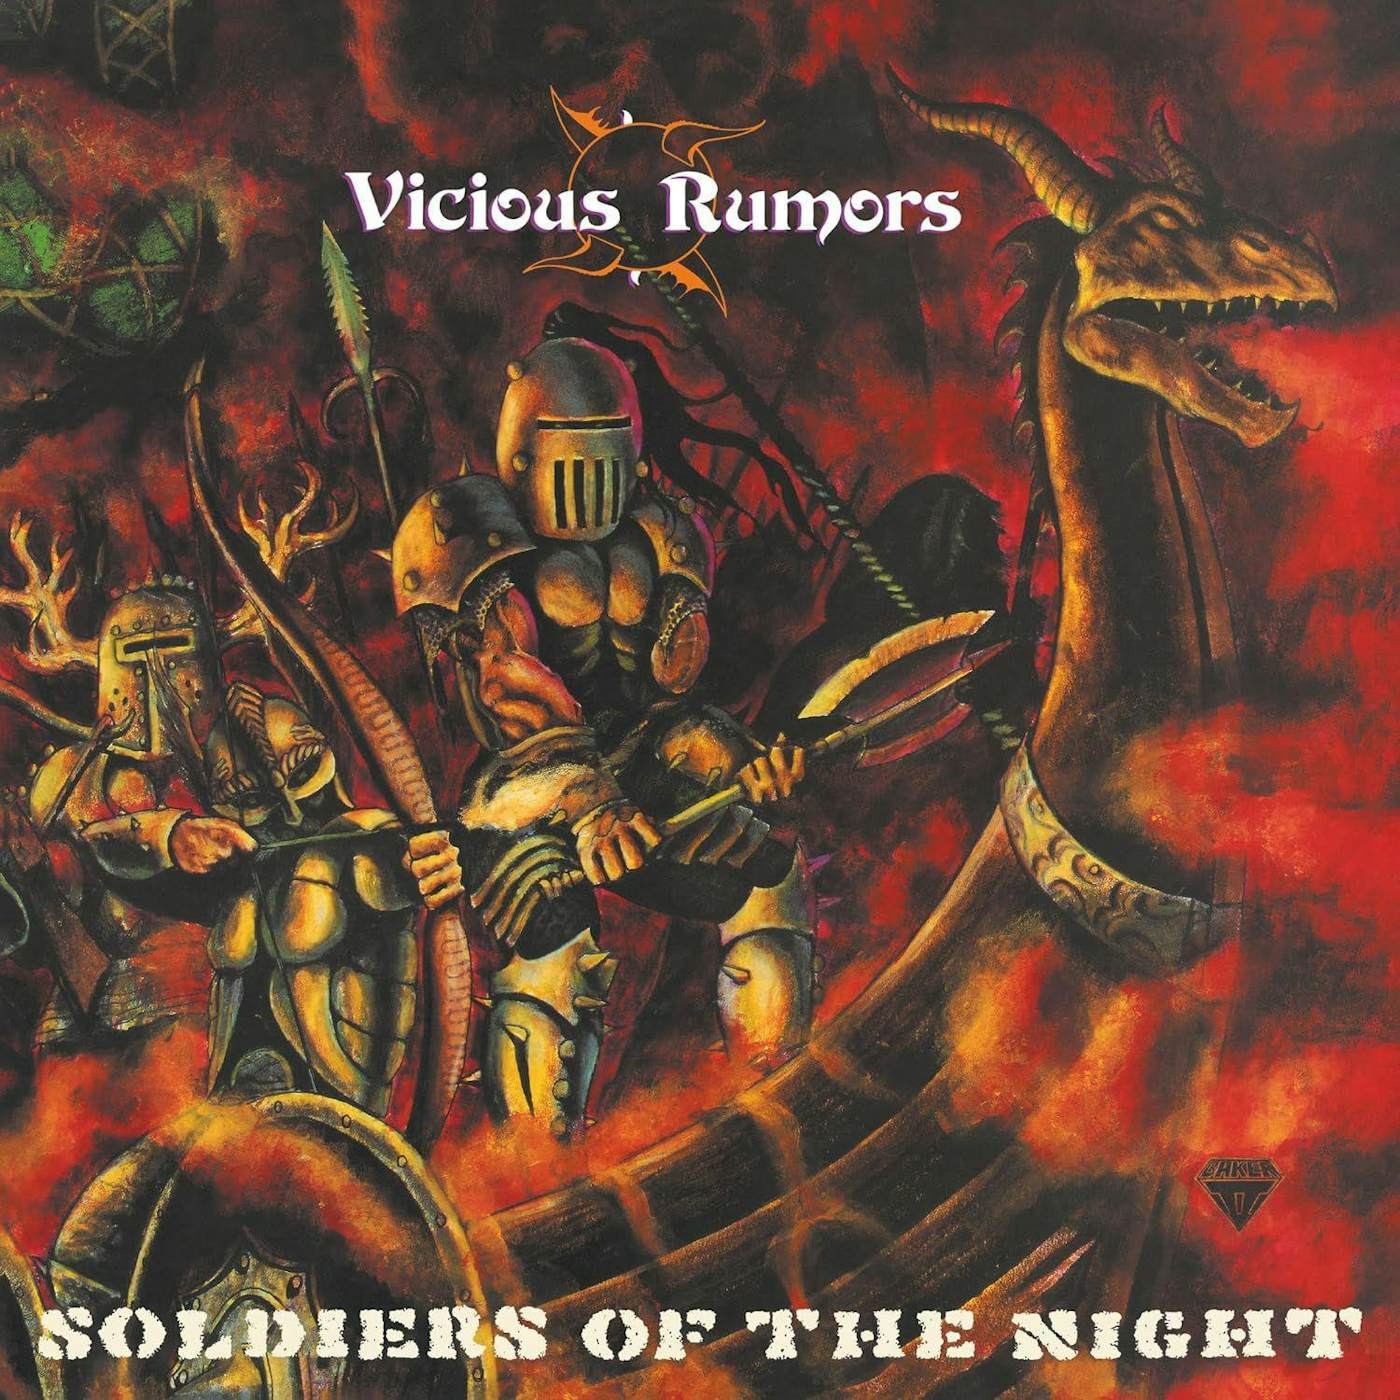 Vicious Rumors Soldiers Of The Night Vinyl Record